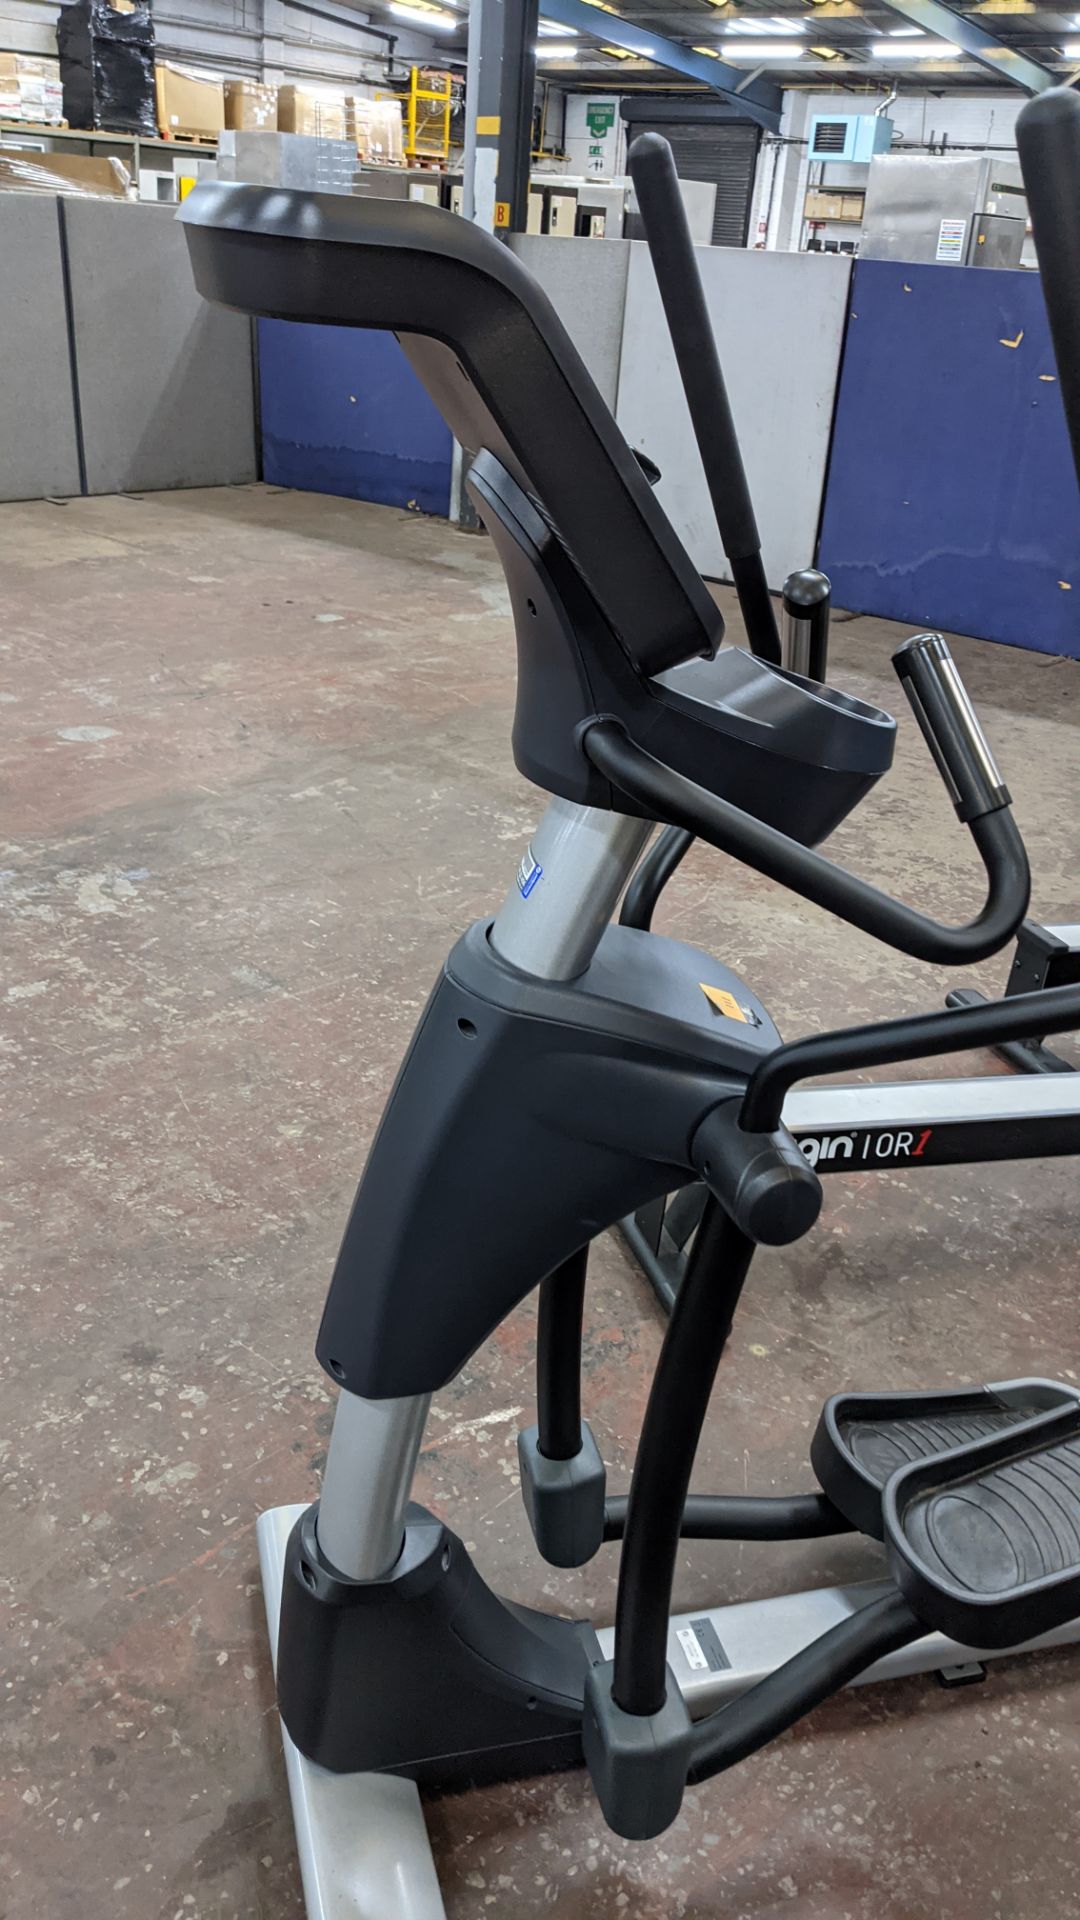 Impulse model RE500 Elliptical Cross Trainer. 21" stride length, 7" step on height. LED display cons - Image 4 of 13